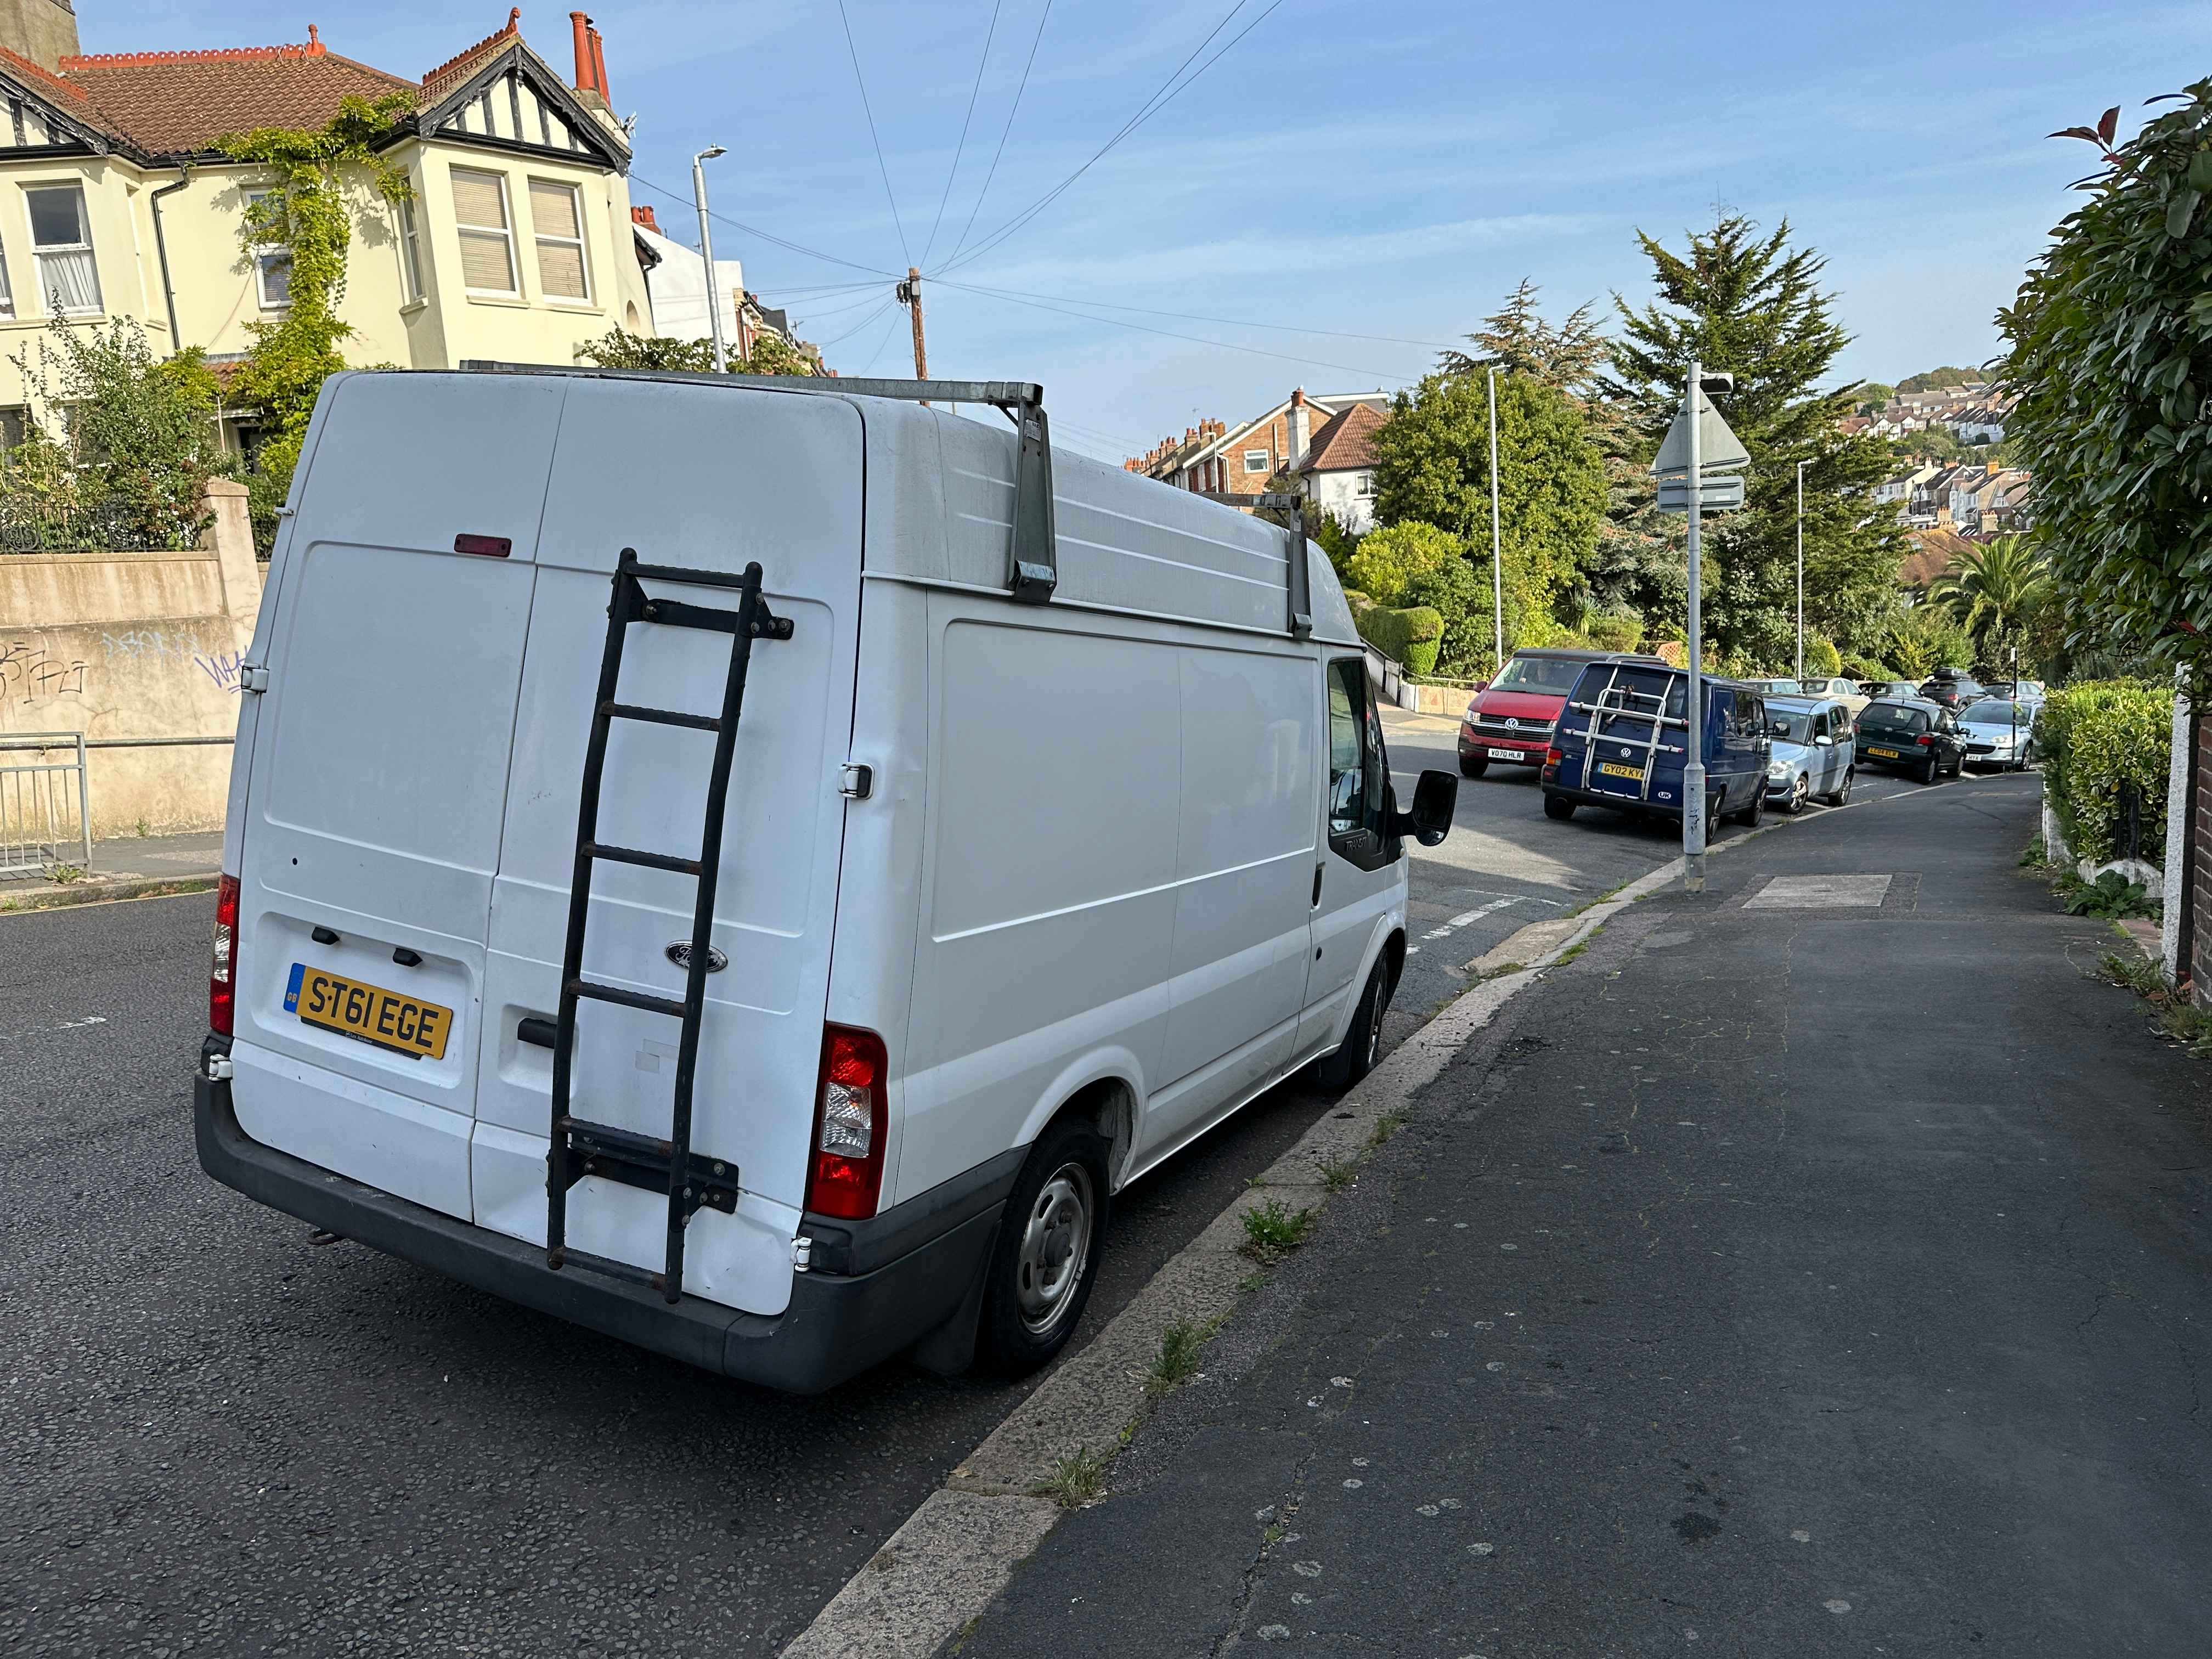 Photograph of ST61 EGE - a White Ford Transit parked in Hollingdean by a non-resident. The first of six photographs supplied by the residents of Hollingdean.